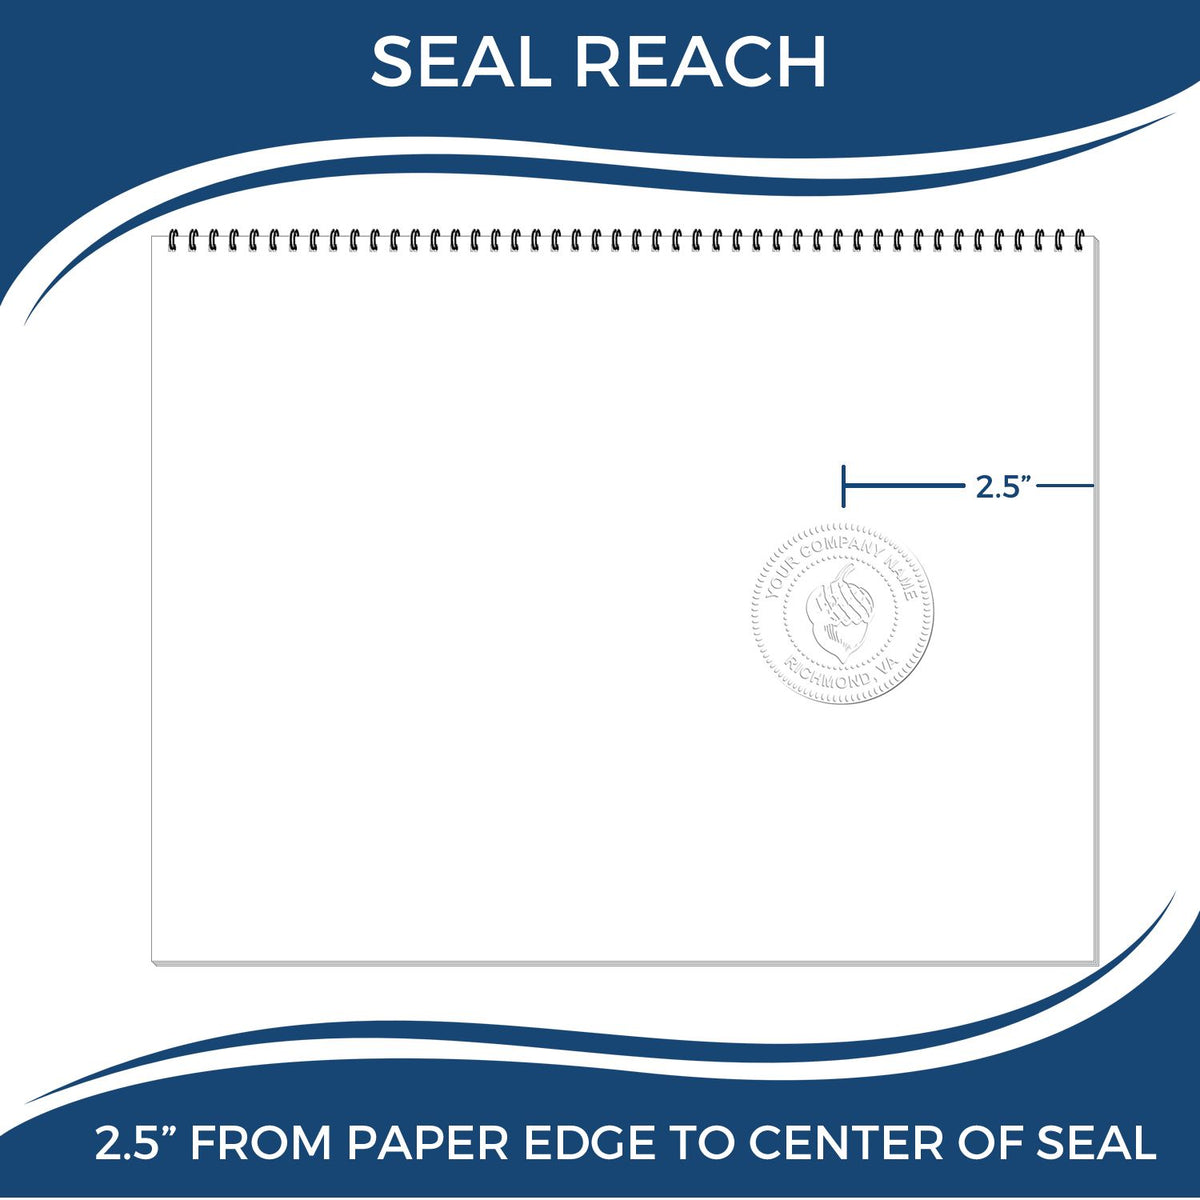 An infographic showing the seal reach which is represented by a ruler and a miniature seal image of the Heavy Duty Cast Iron Nebraska Engineer Seal Embosser